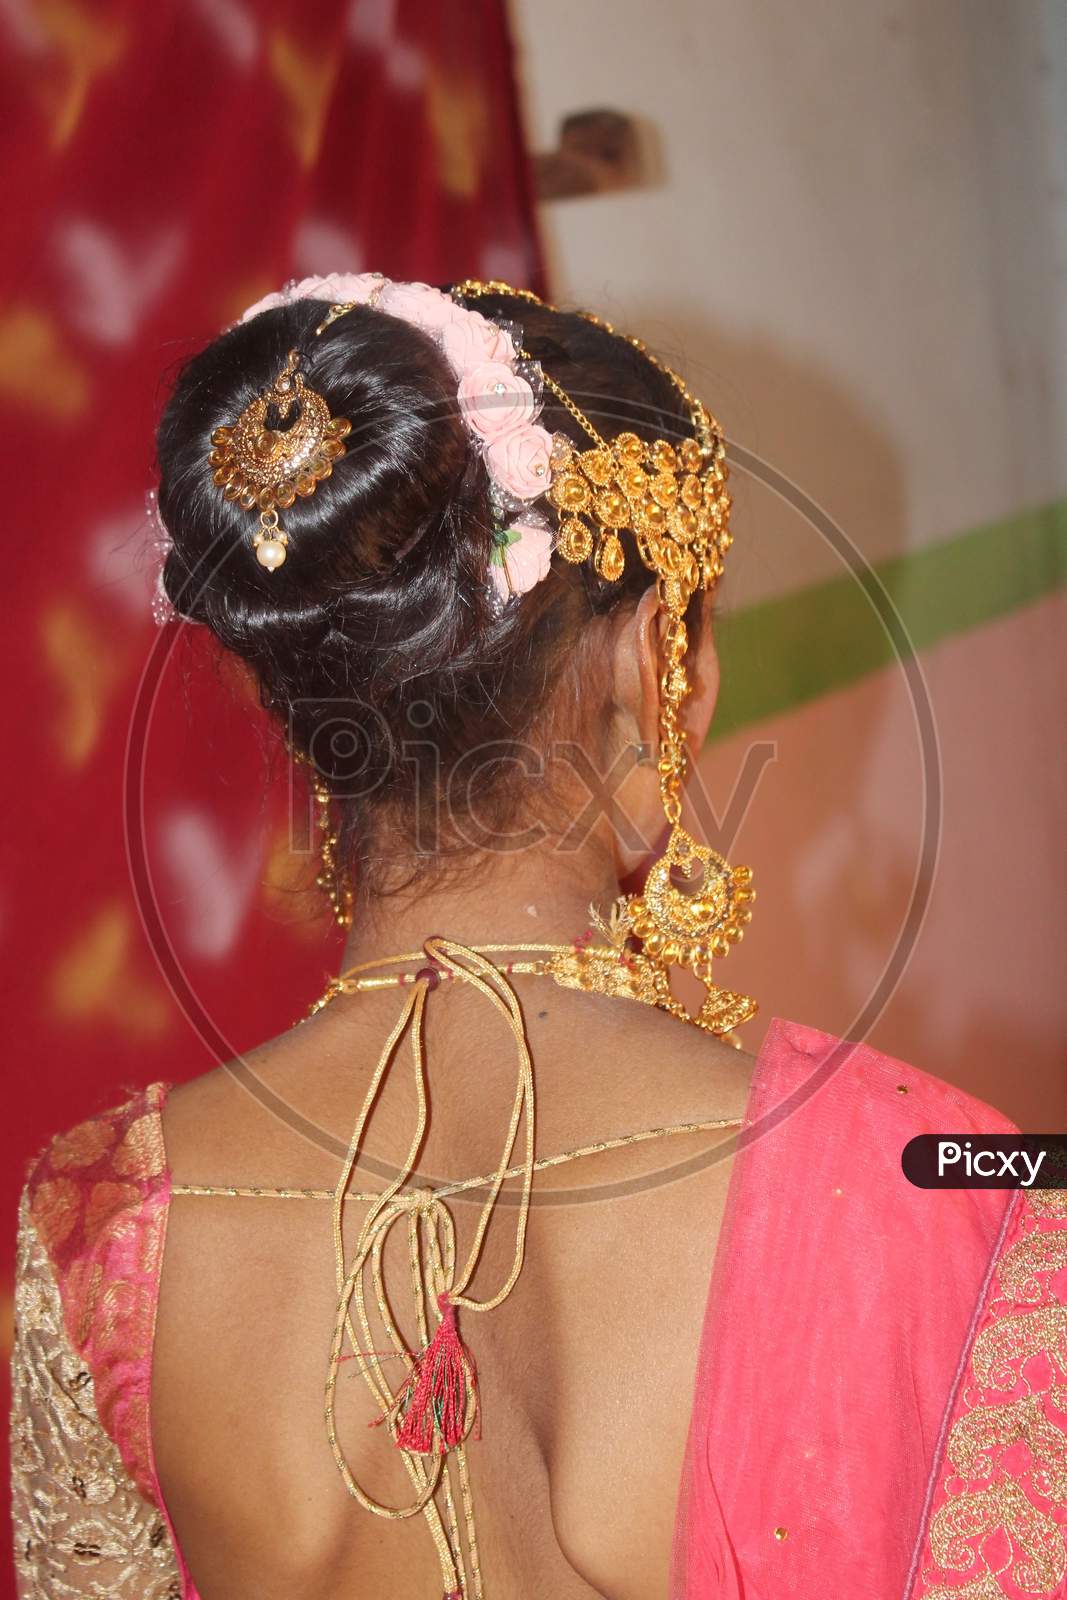 Indian marriage attire and lifestyle. Indian Gujarati Bride or Dulhan in her traditional ethnic wedding dress.Indian marriage attire and lifestyle.